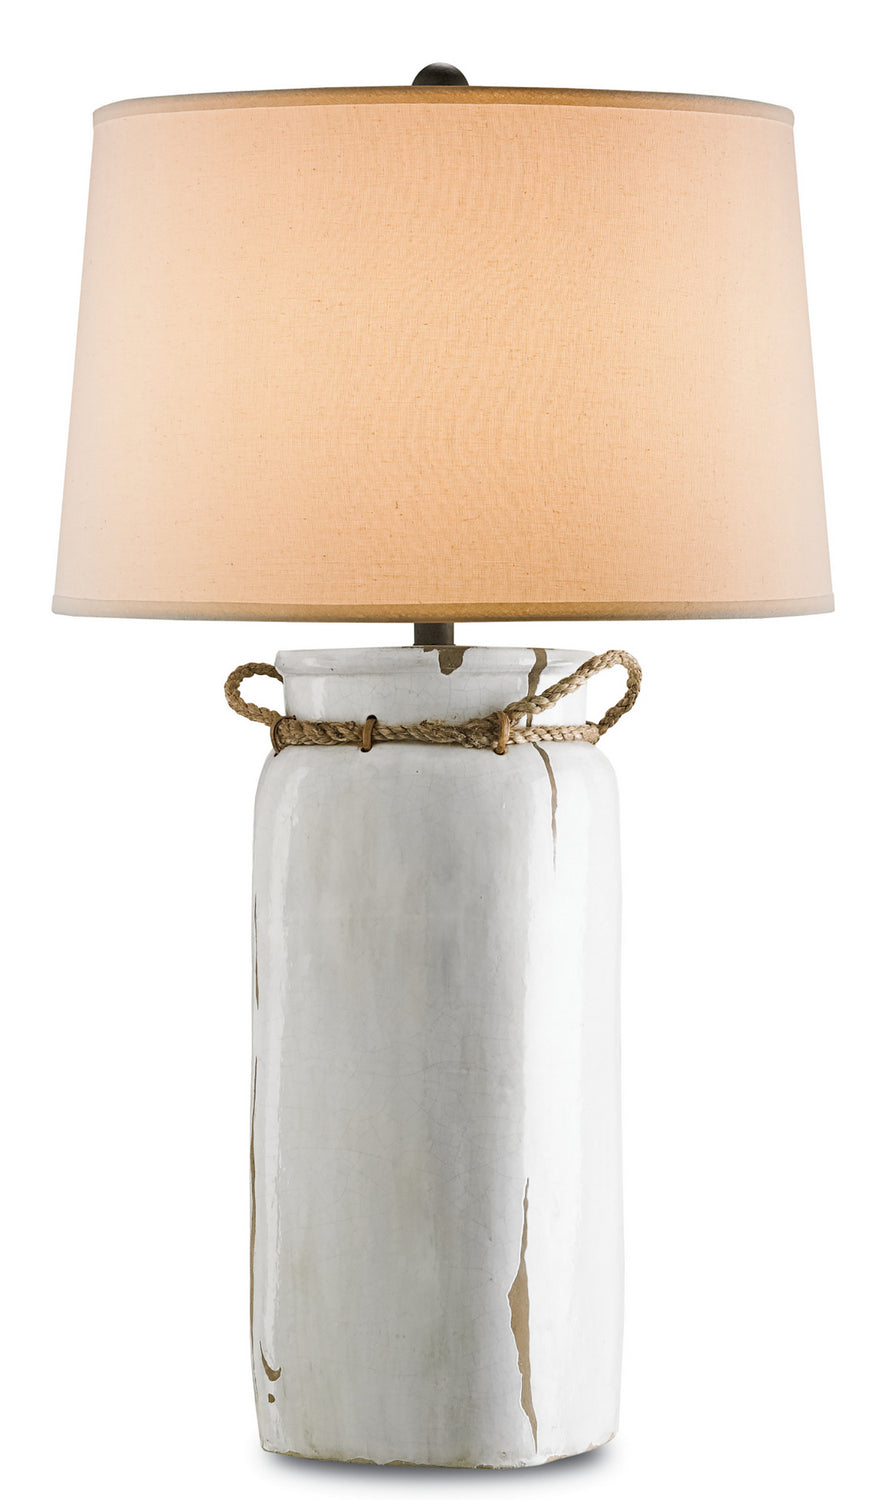 One Light Table Lamp from the Sailaway collection in White Distress Crackle/Natural/Emery Rust finish